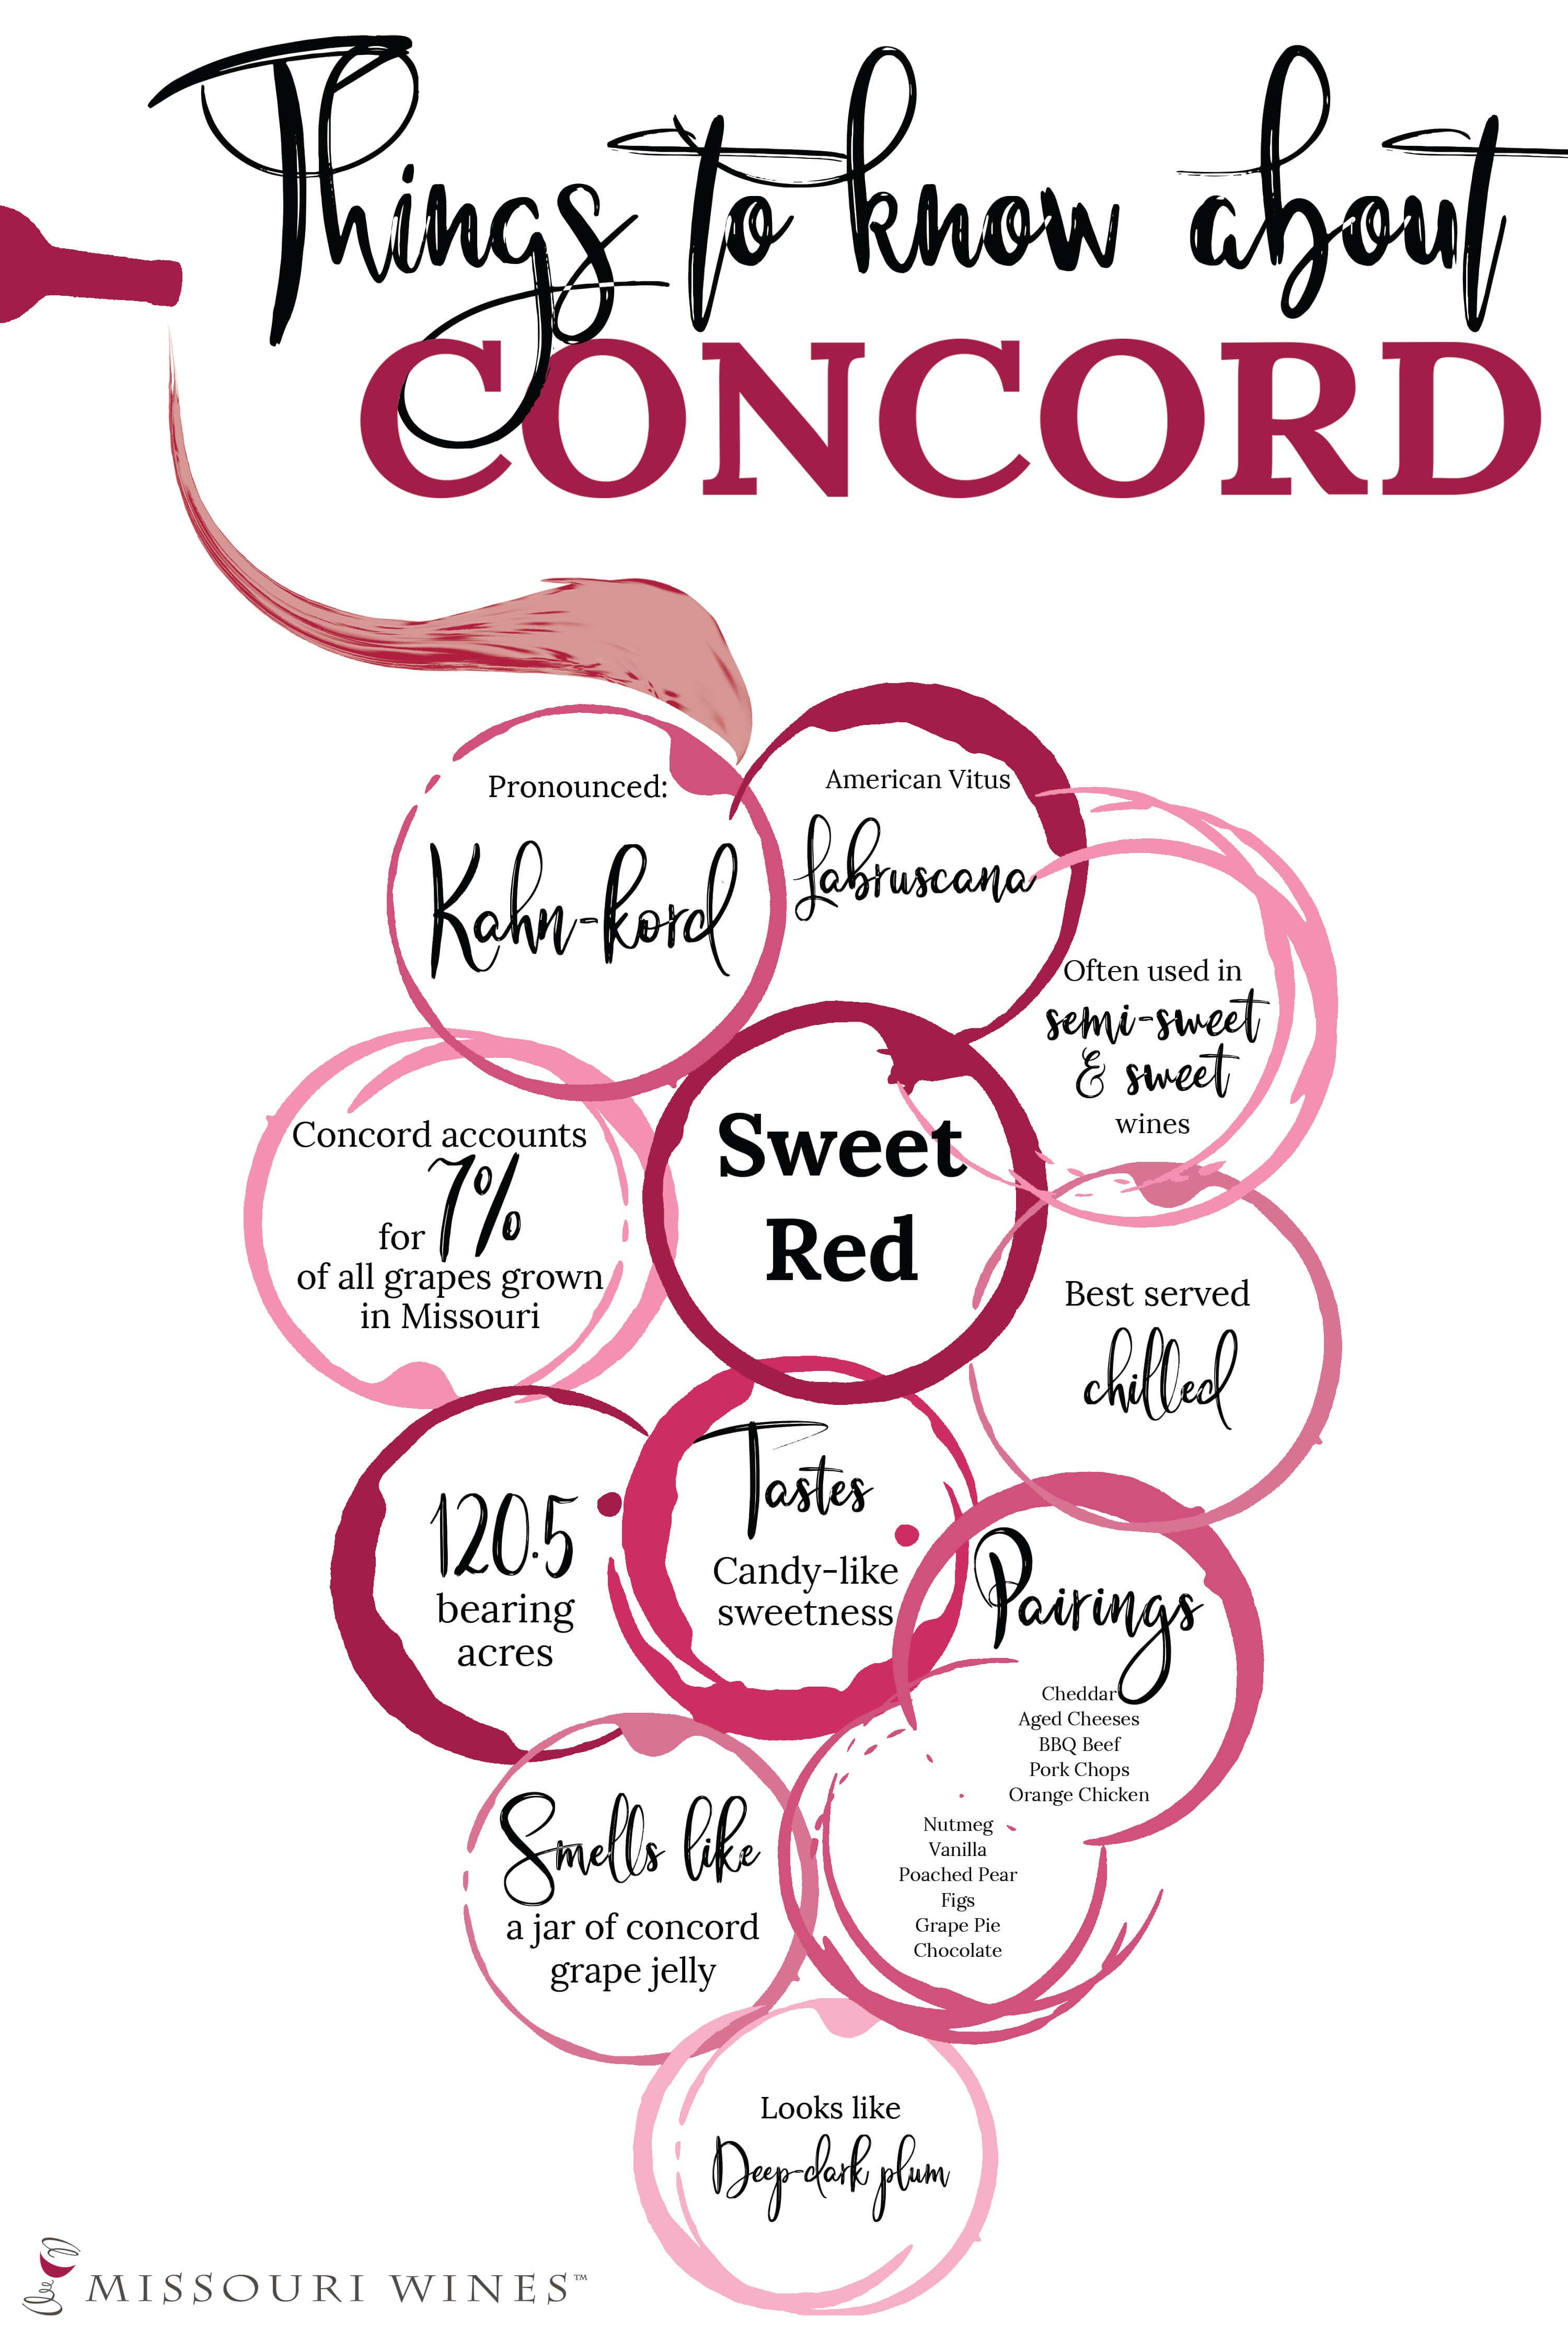 Things to Know About Concord